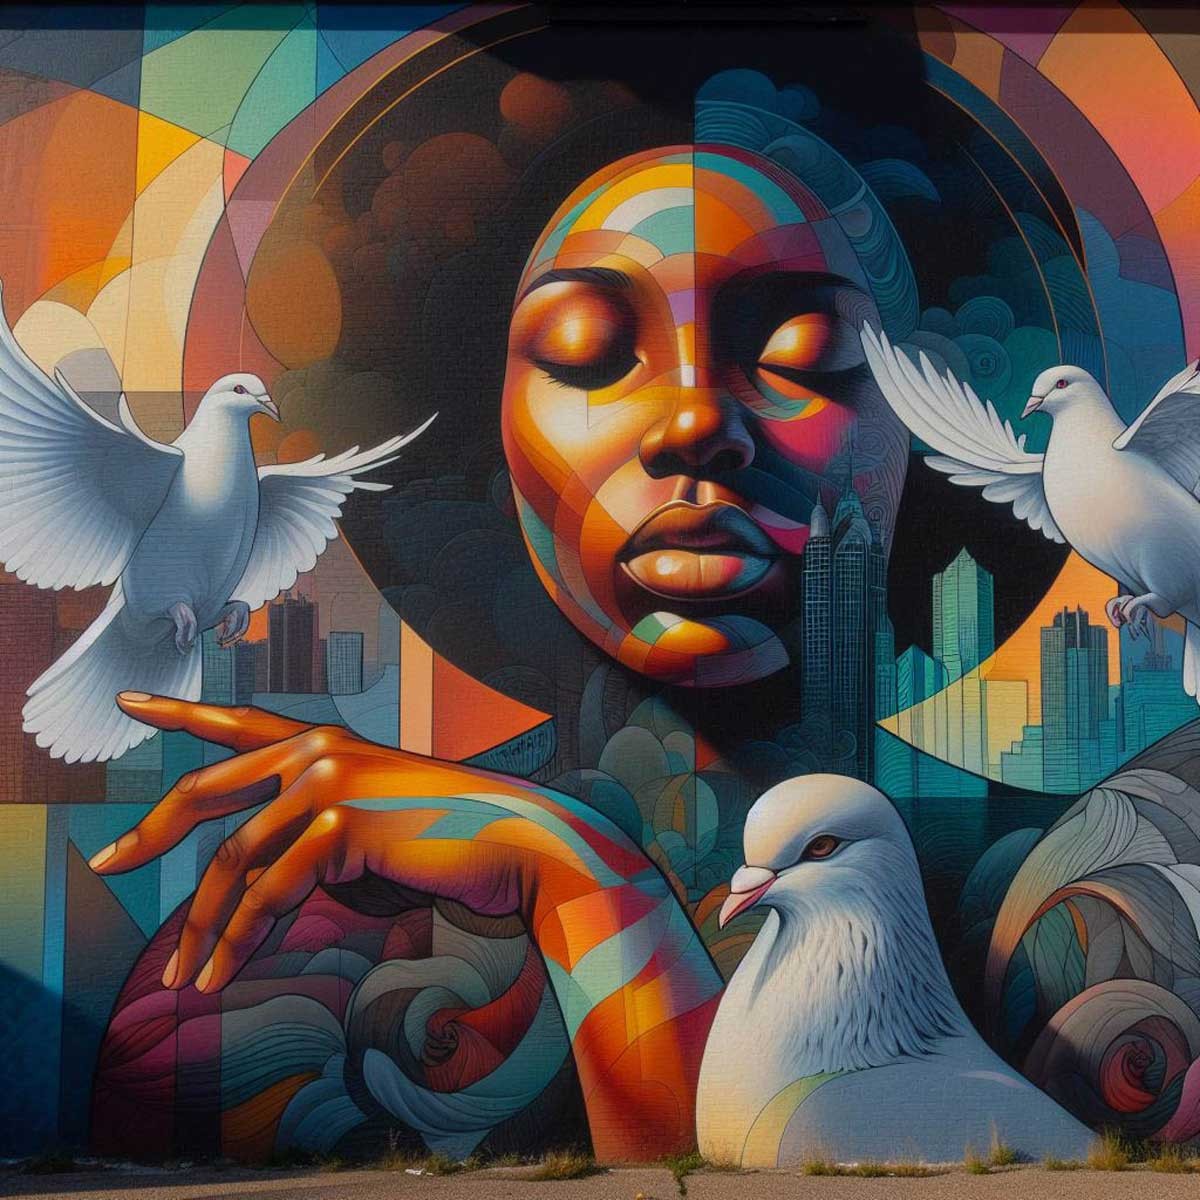 A mural design by Fe’le.